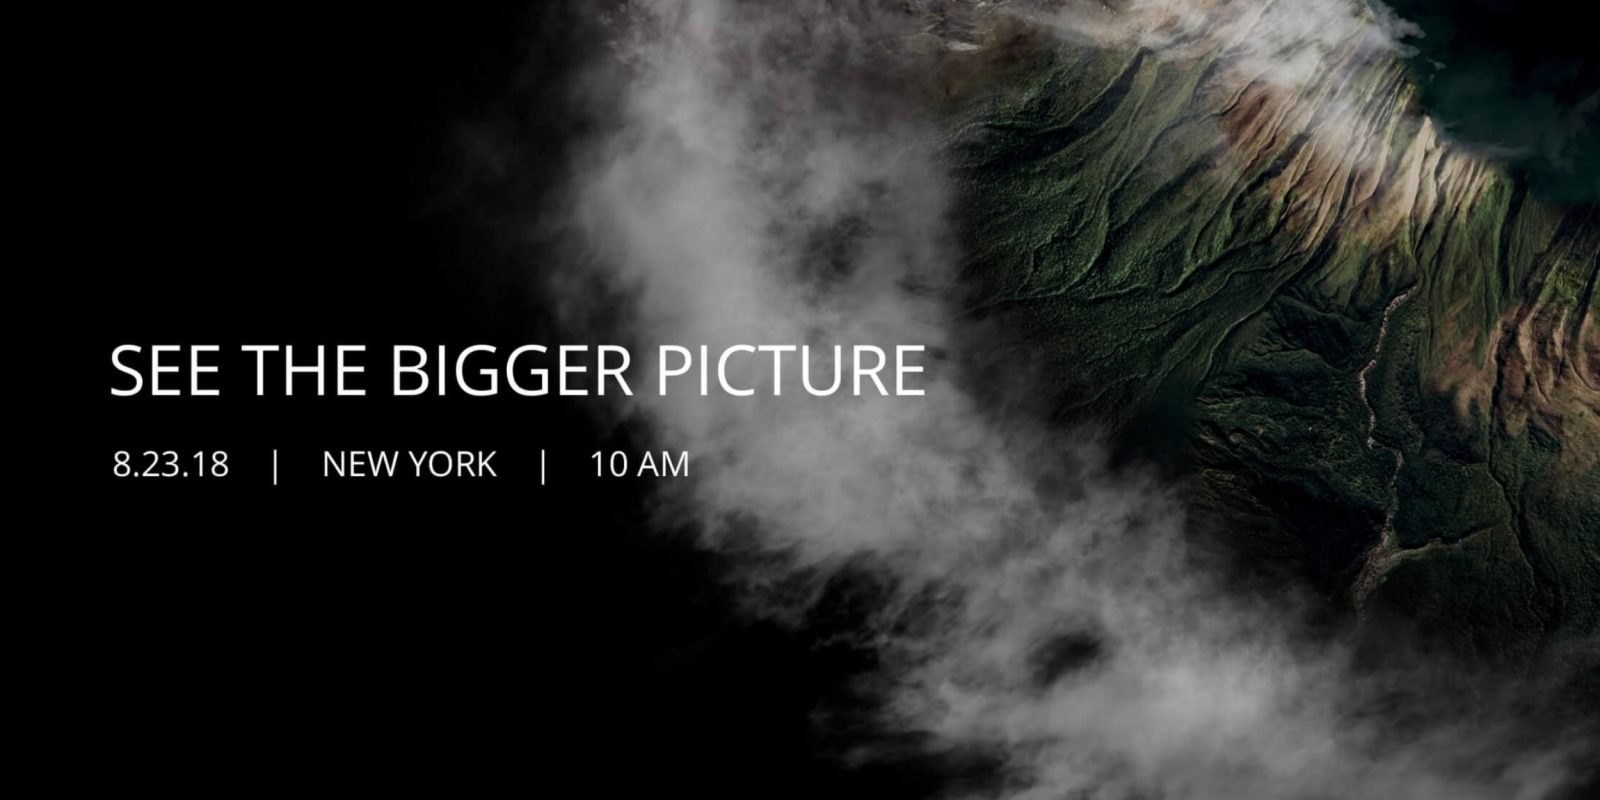 DJI official announcement of their rescheduled "See the Bigger Picture" event.